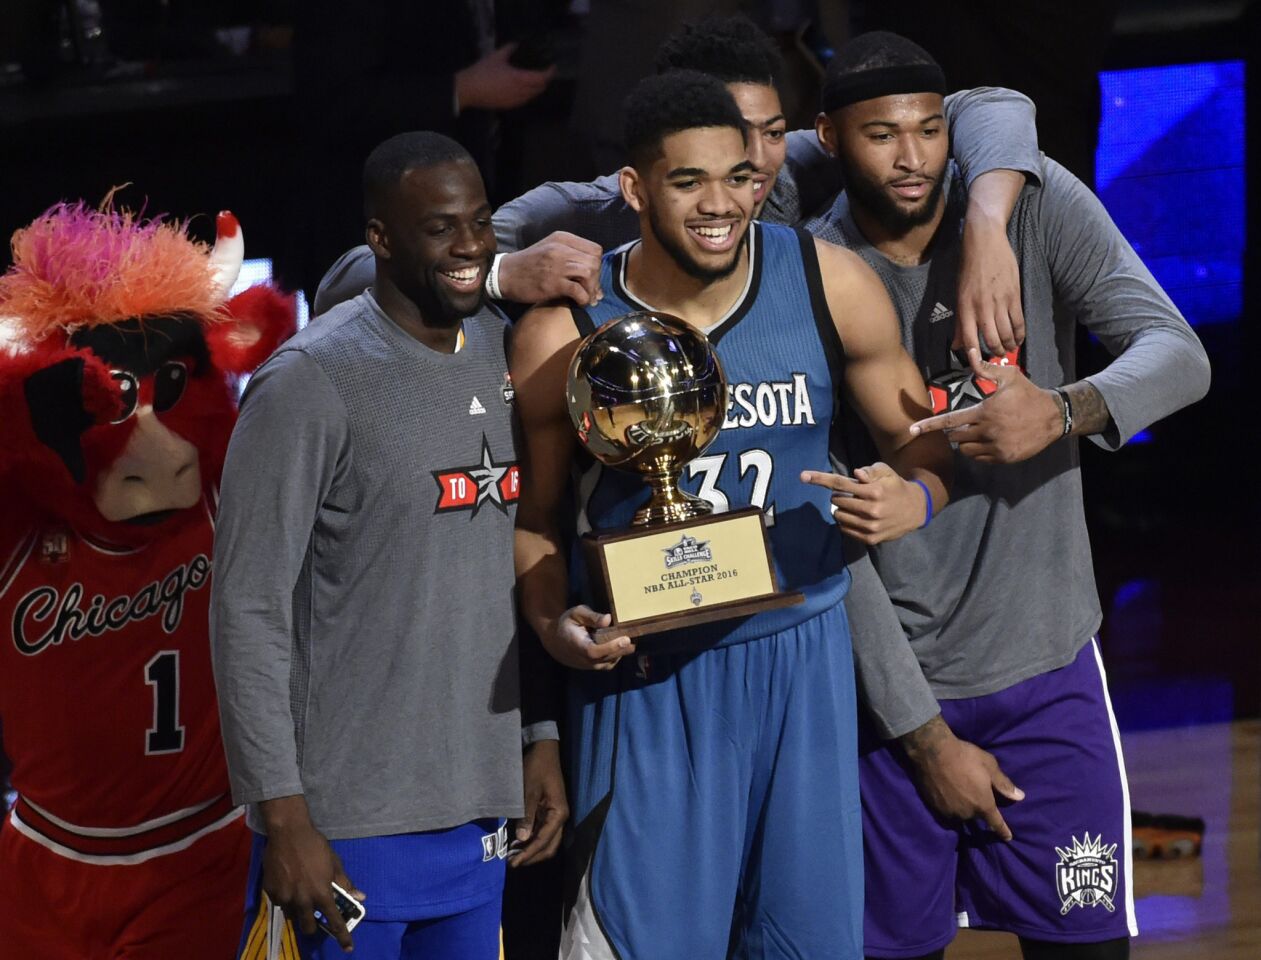 Timberwolves forward Karl-Anthony Towns holds his Skills Challenge trophy while taking a photo with (from left) Warriors forward Draymond Green, Pelicans forward Anthony Davis and Kings center DeMarcus Cousins.